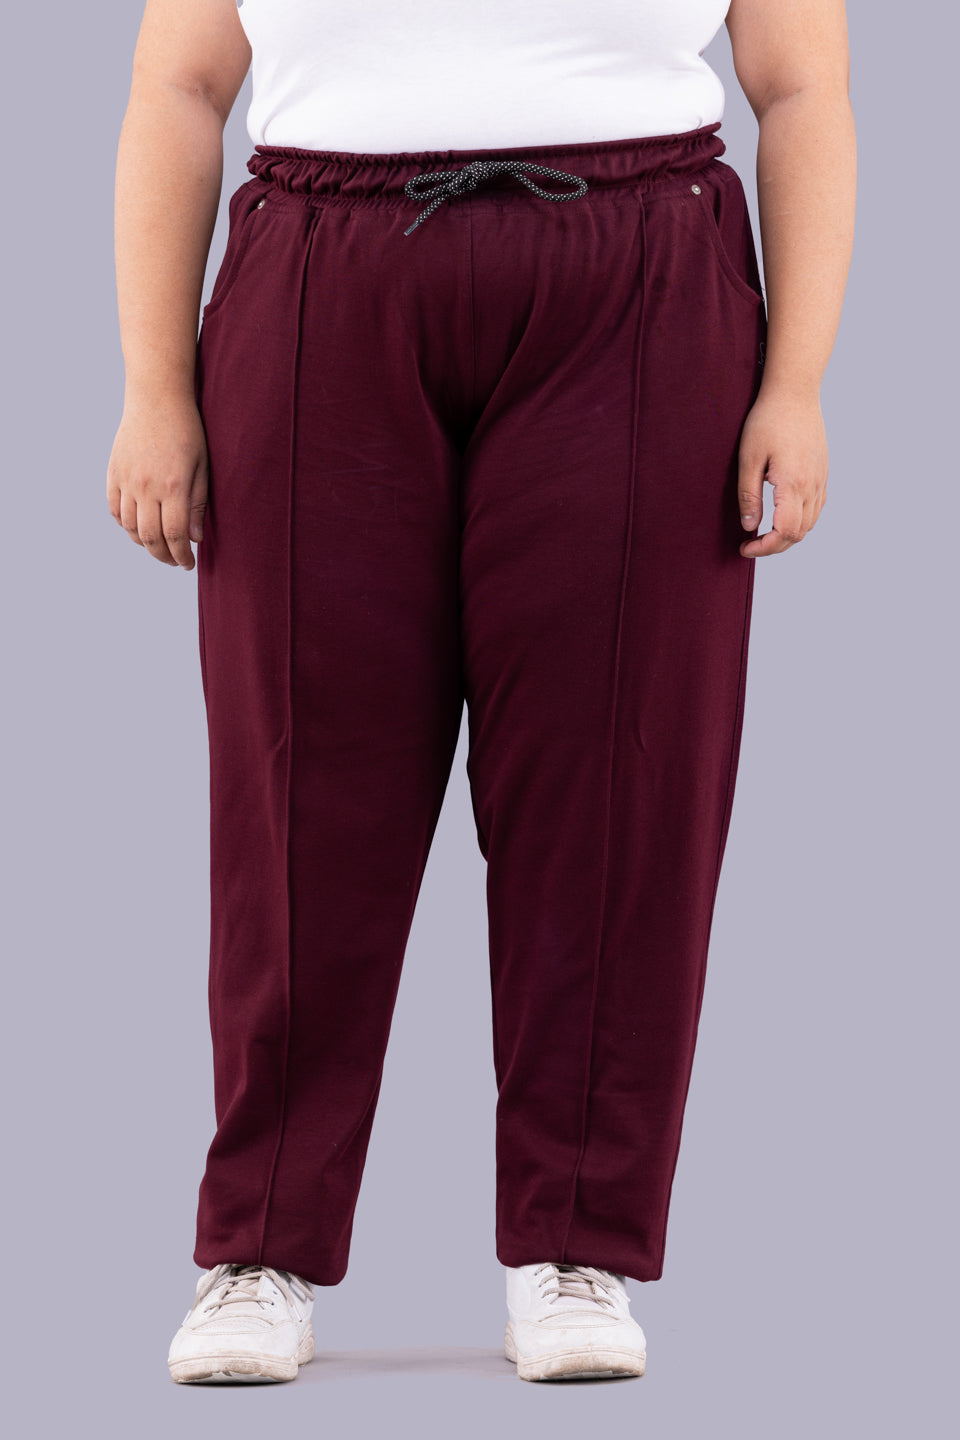 Comfy Wine Relaxed Fit Cotton Trackpants for Women online in India at best prices